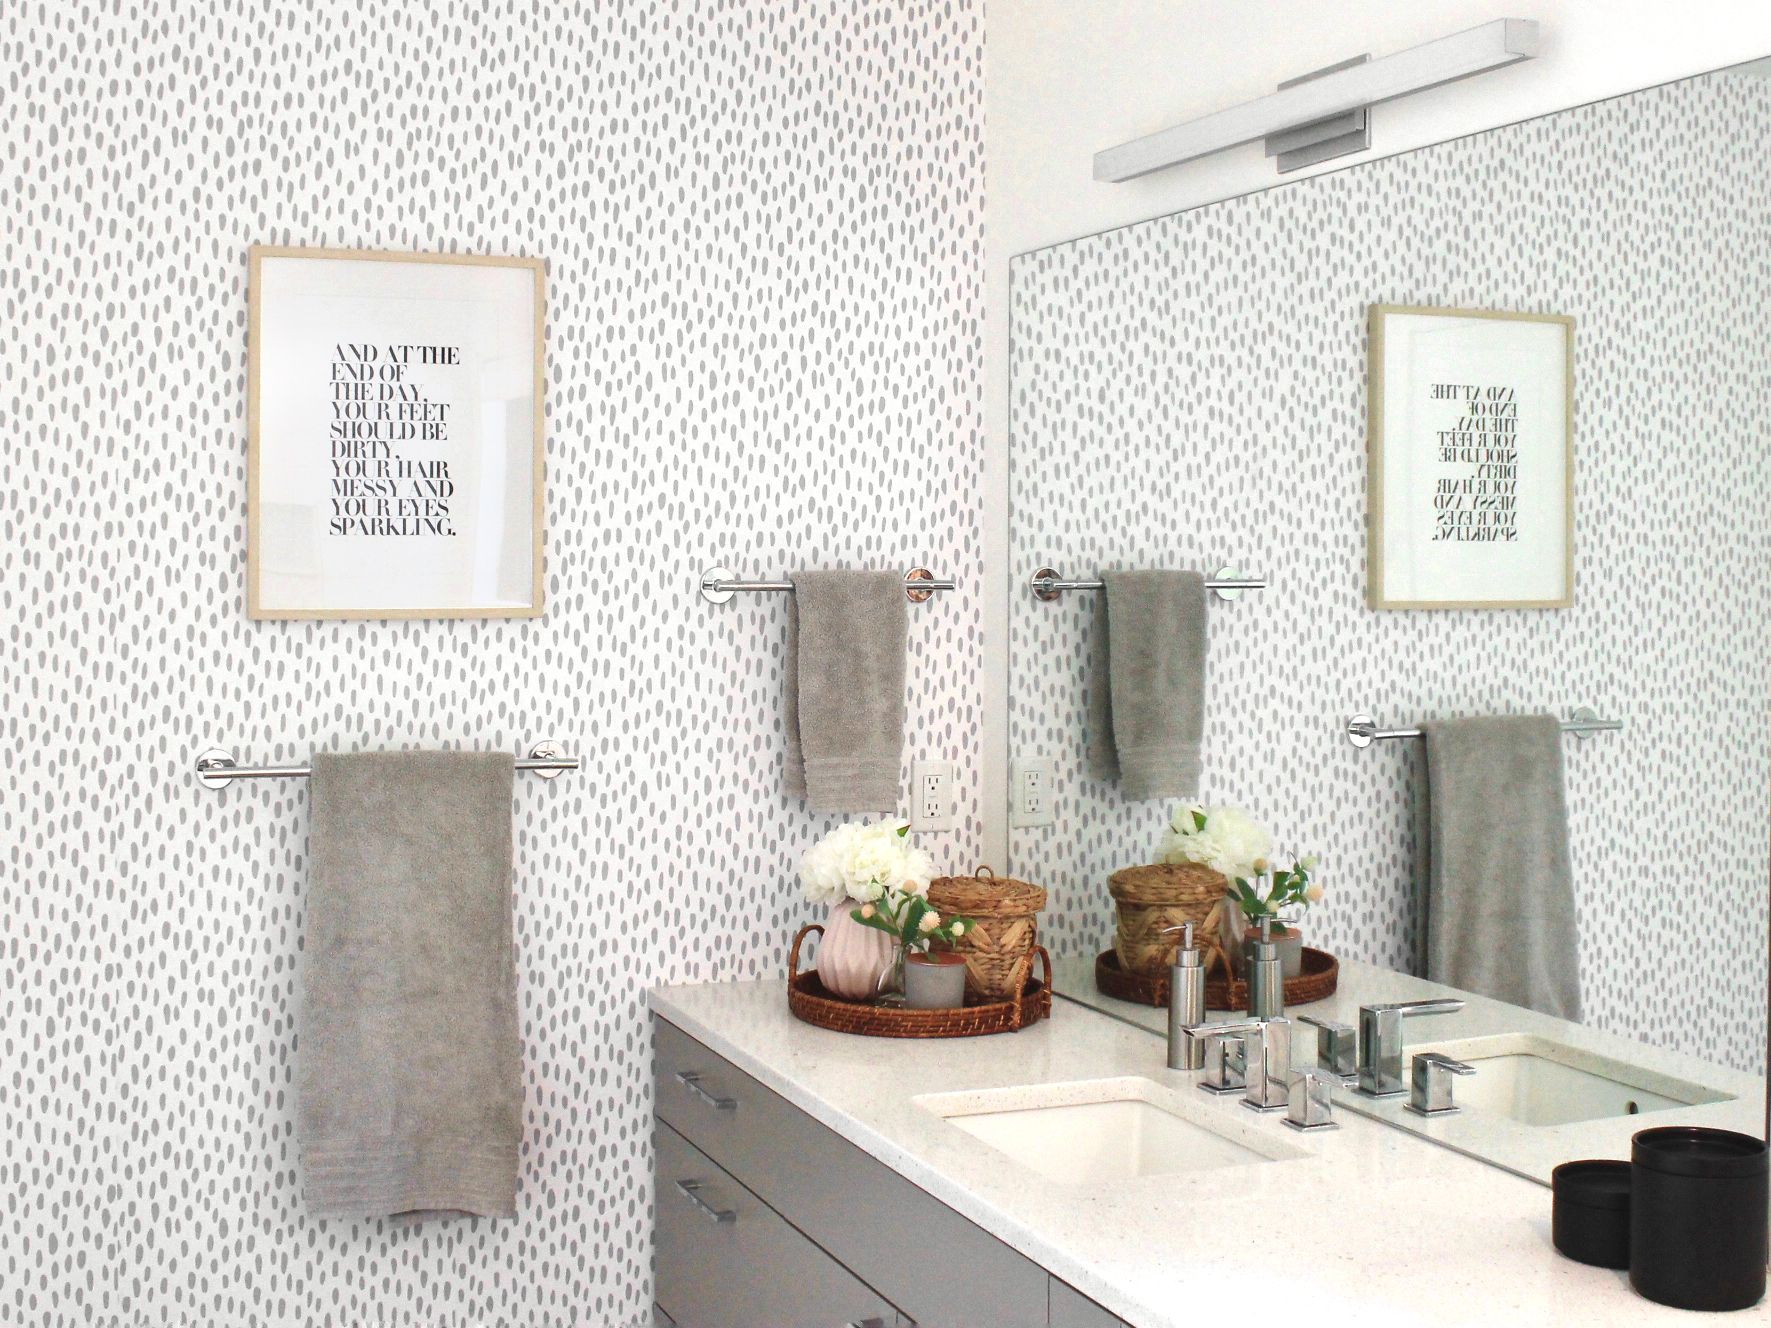 White and grey bathroom - interesting wall